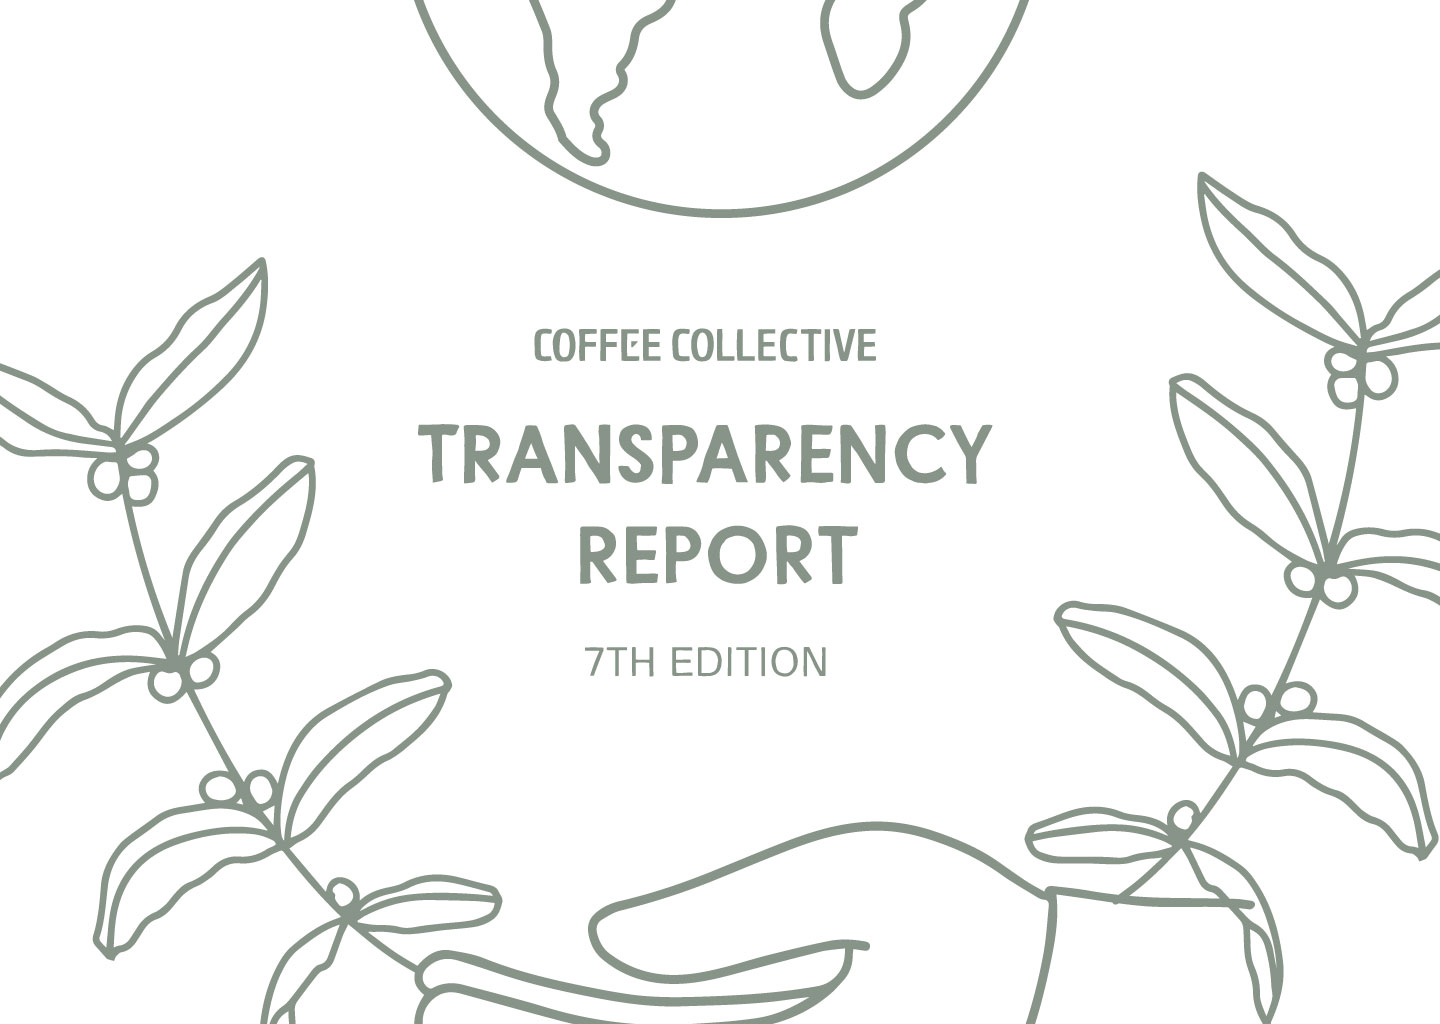 Transparency Report | 7th Edition